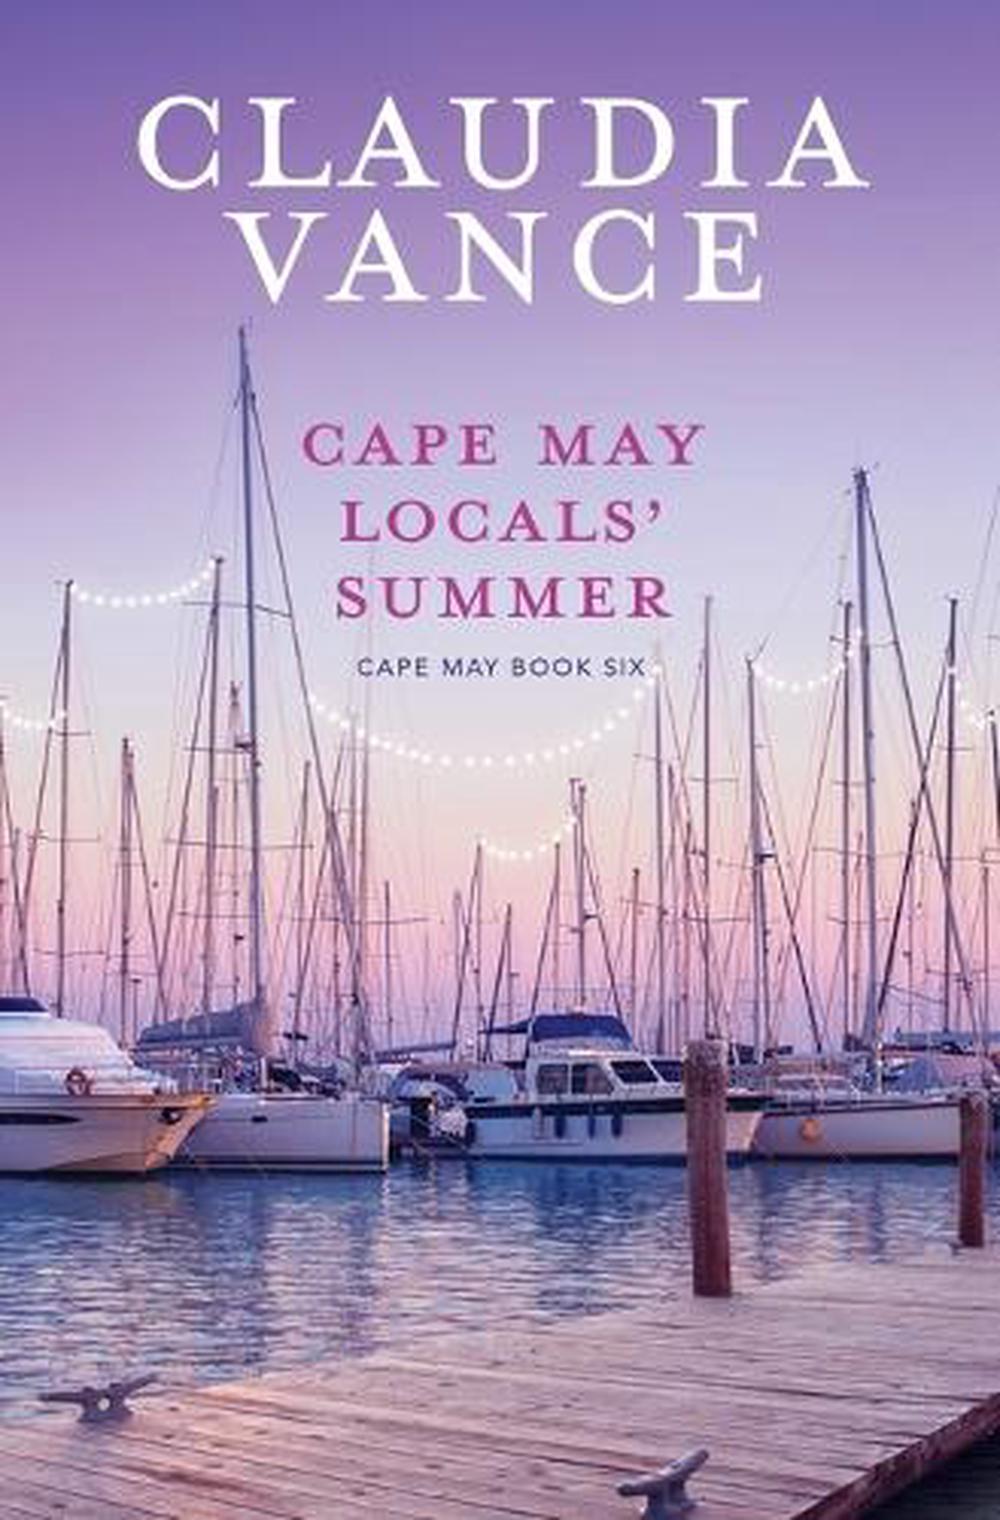 MAY　Summer　PicClick　Book　Paperback　$35.17　Claudia　B　6)　(Cape　Vance　(English)　by　May　LOCALS'　CAPE　AU